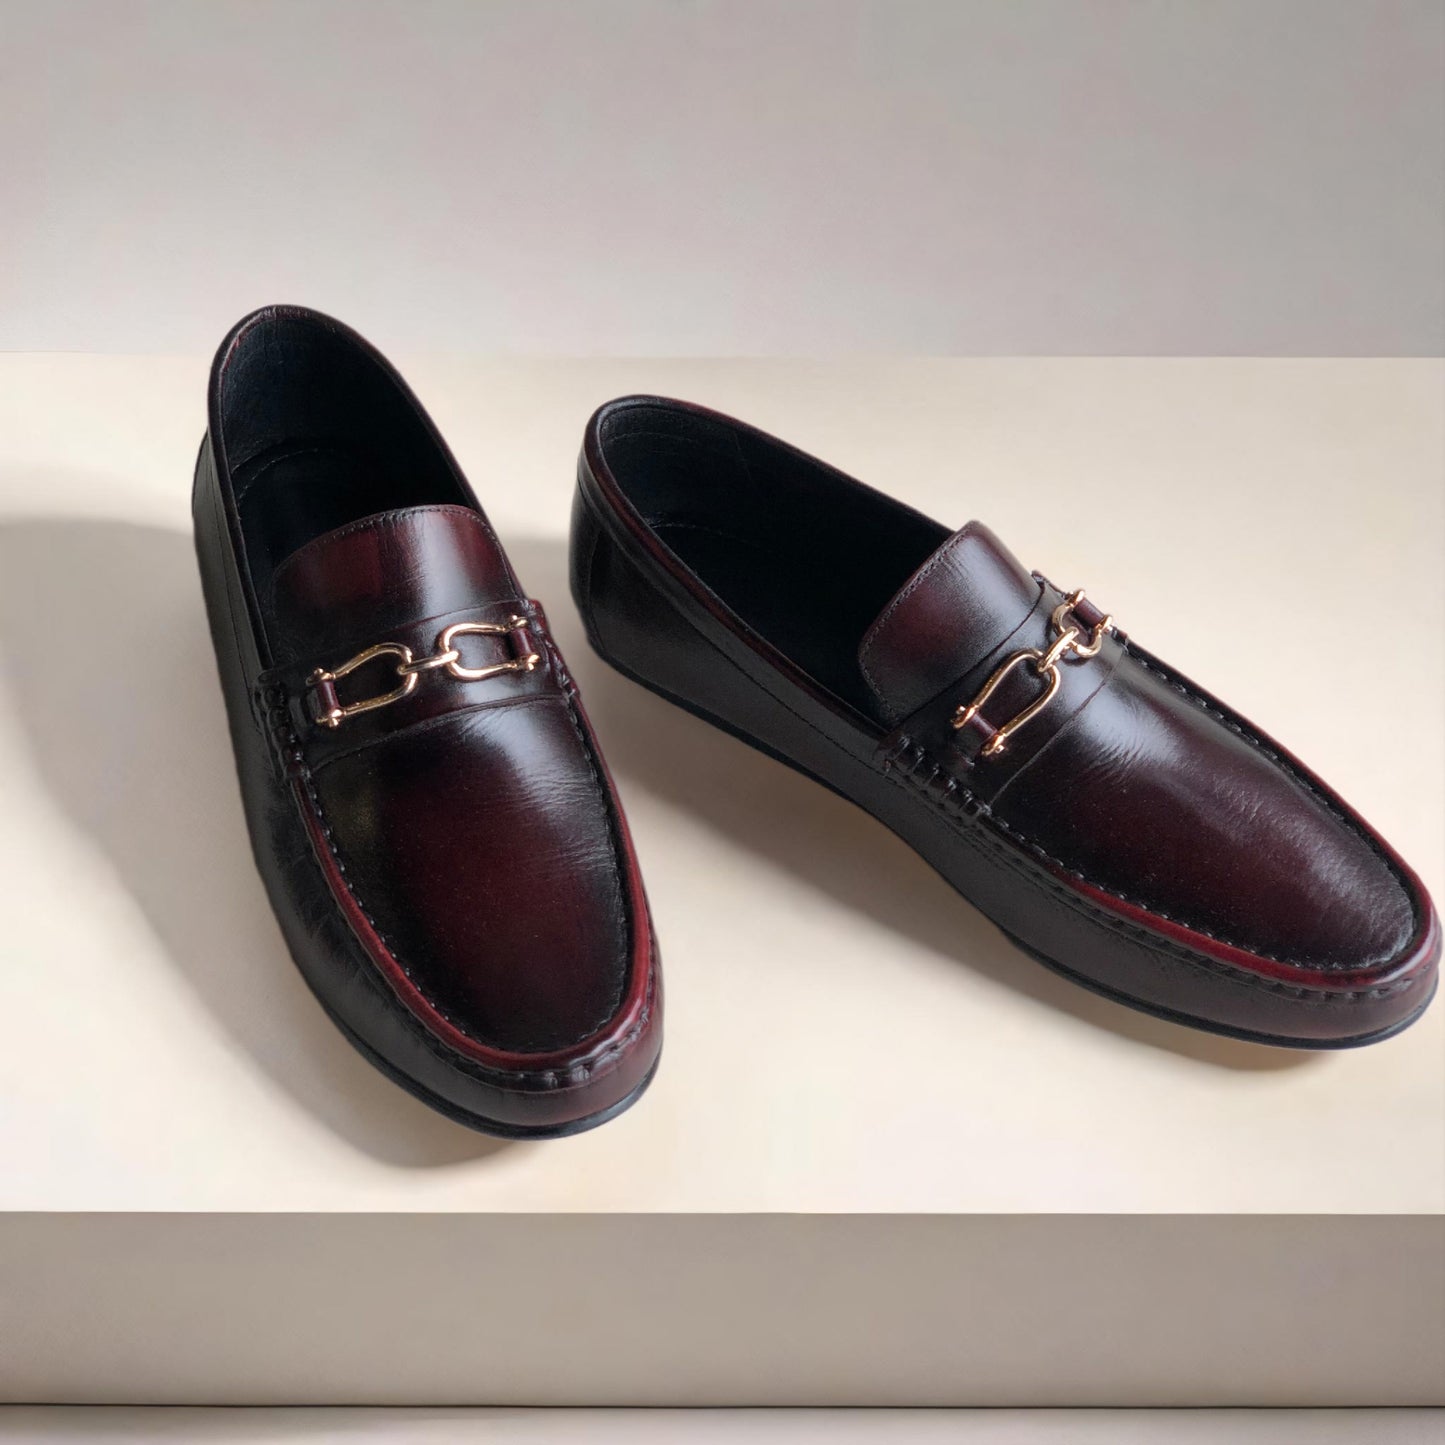 Burgundy Chain Buckle Driving Loafer